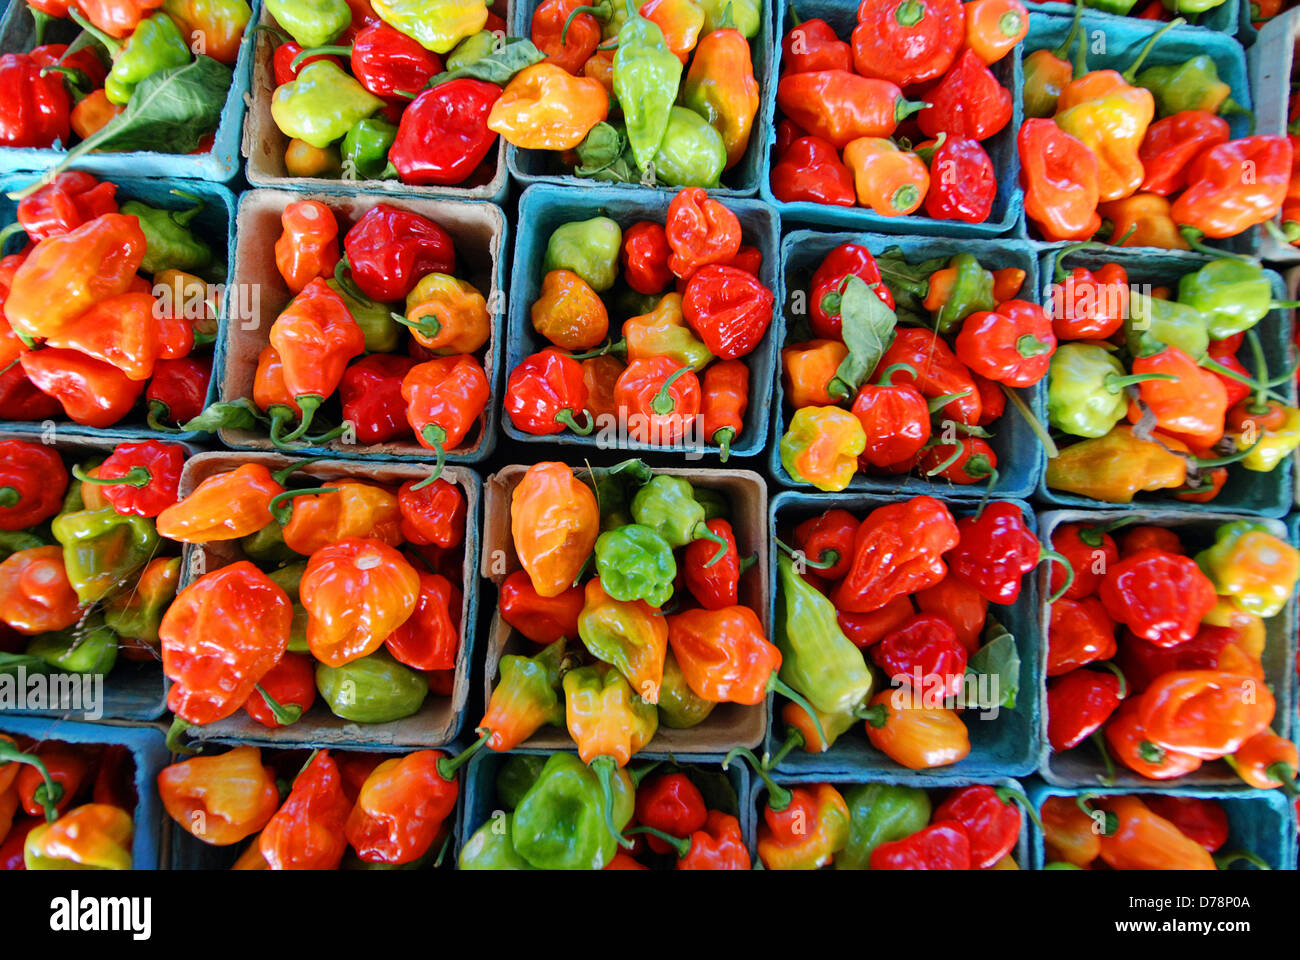 USA, New York, Rochester, Cartons of colorful red, orange, green and yellow chilli peppers for sale at the Public Market. Stock Photo